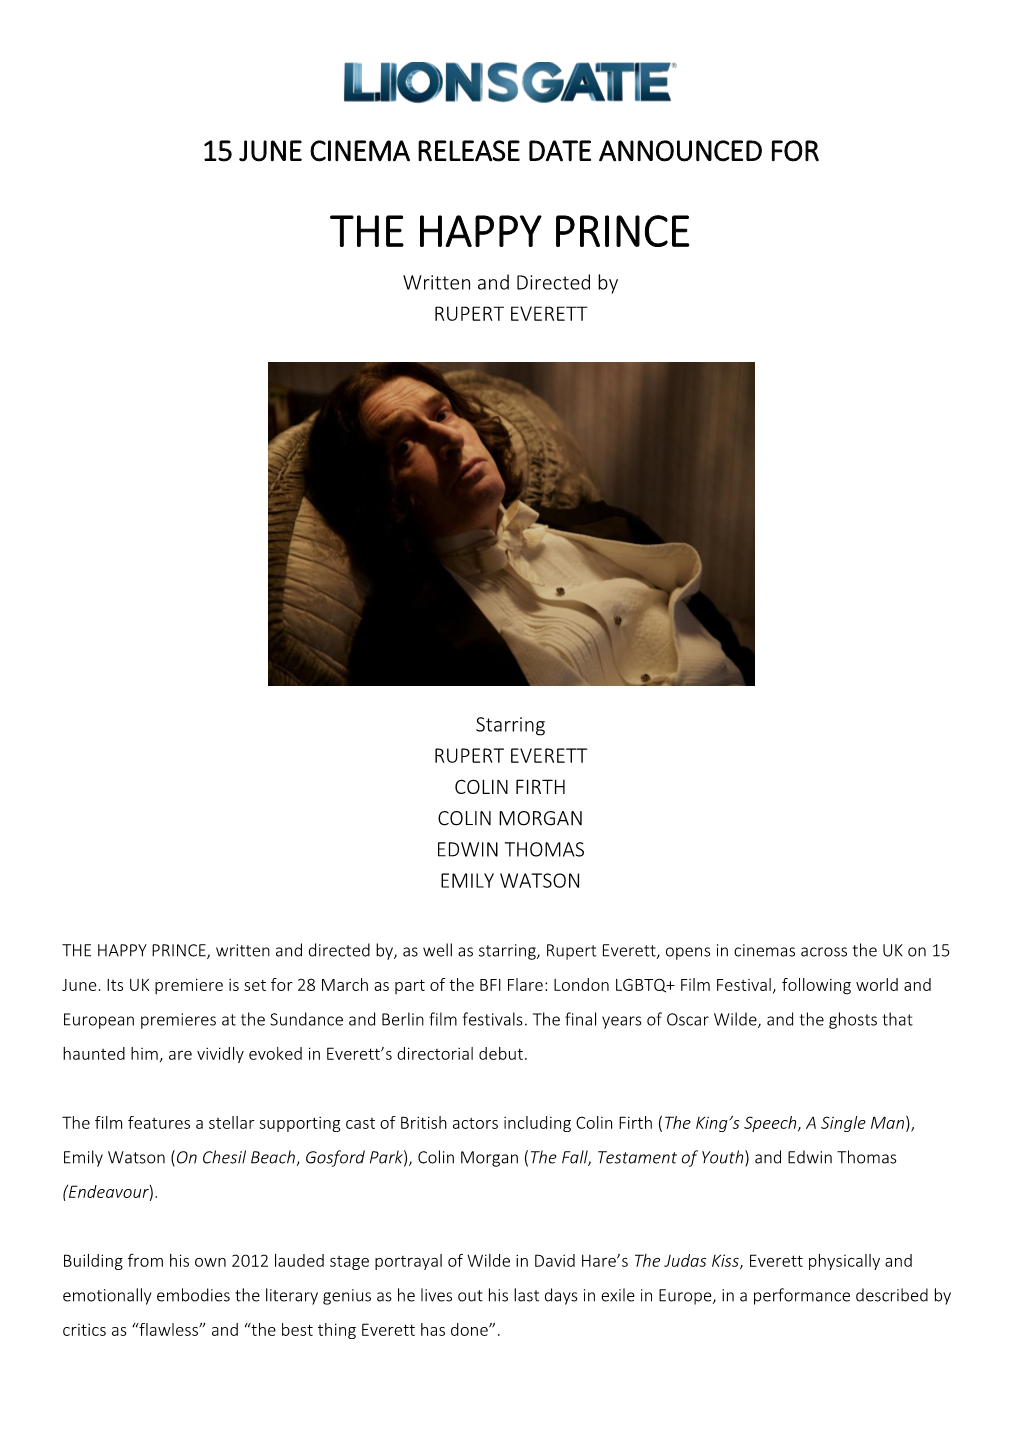 THE HAPPY PRINCE Written and Directed by RUPERT EVERETT